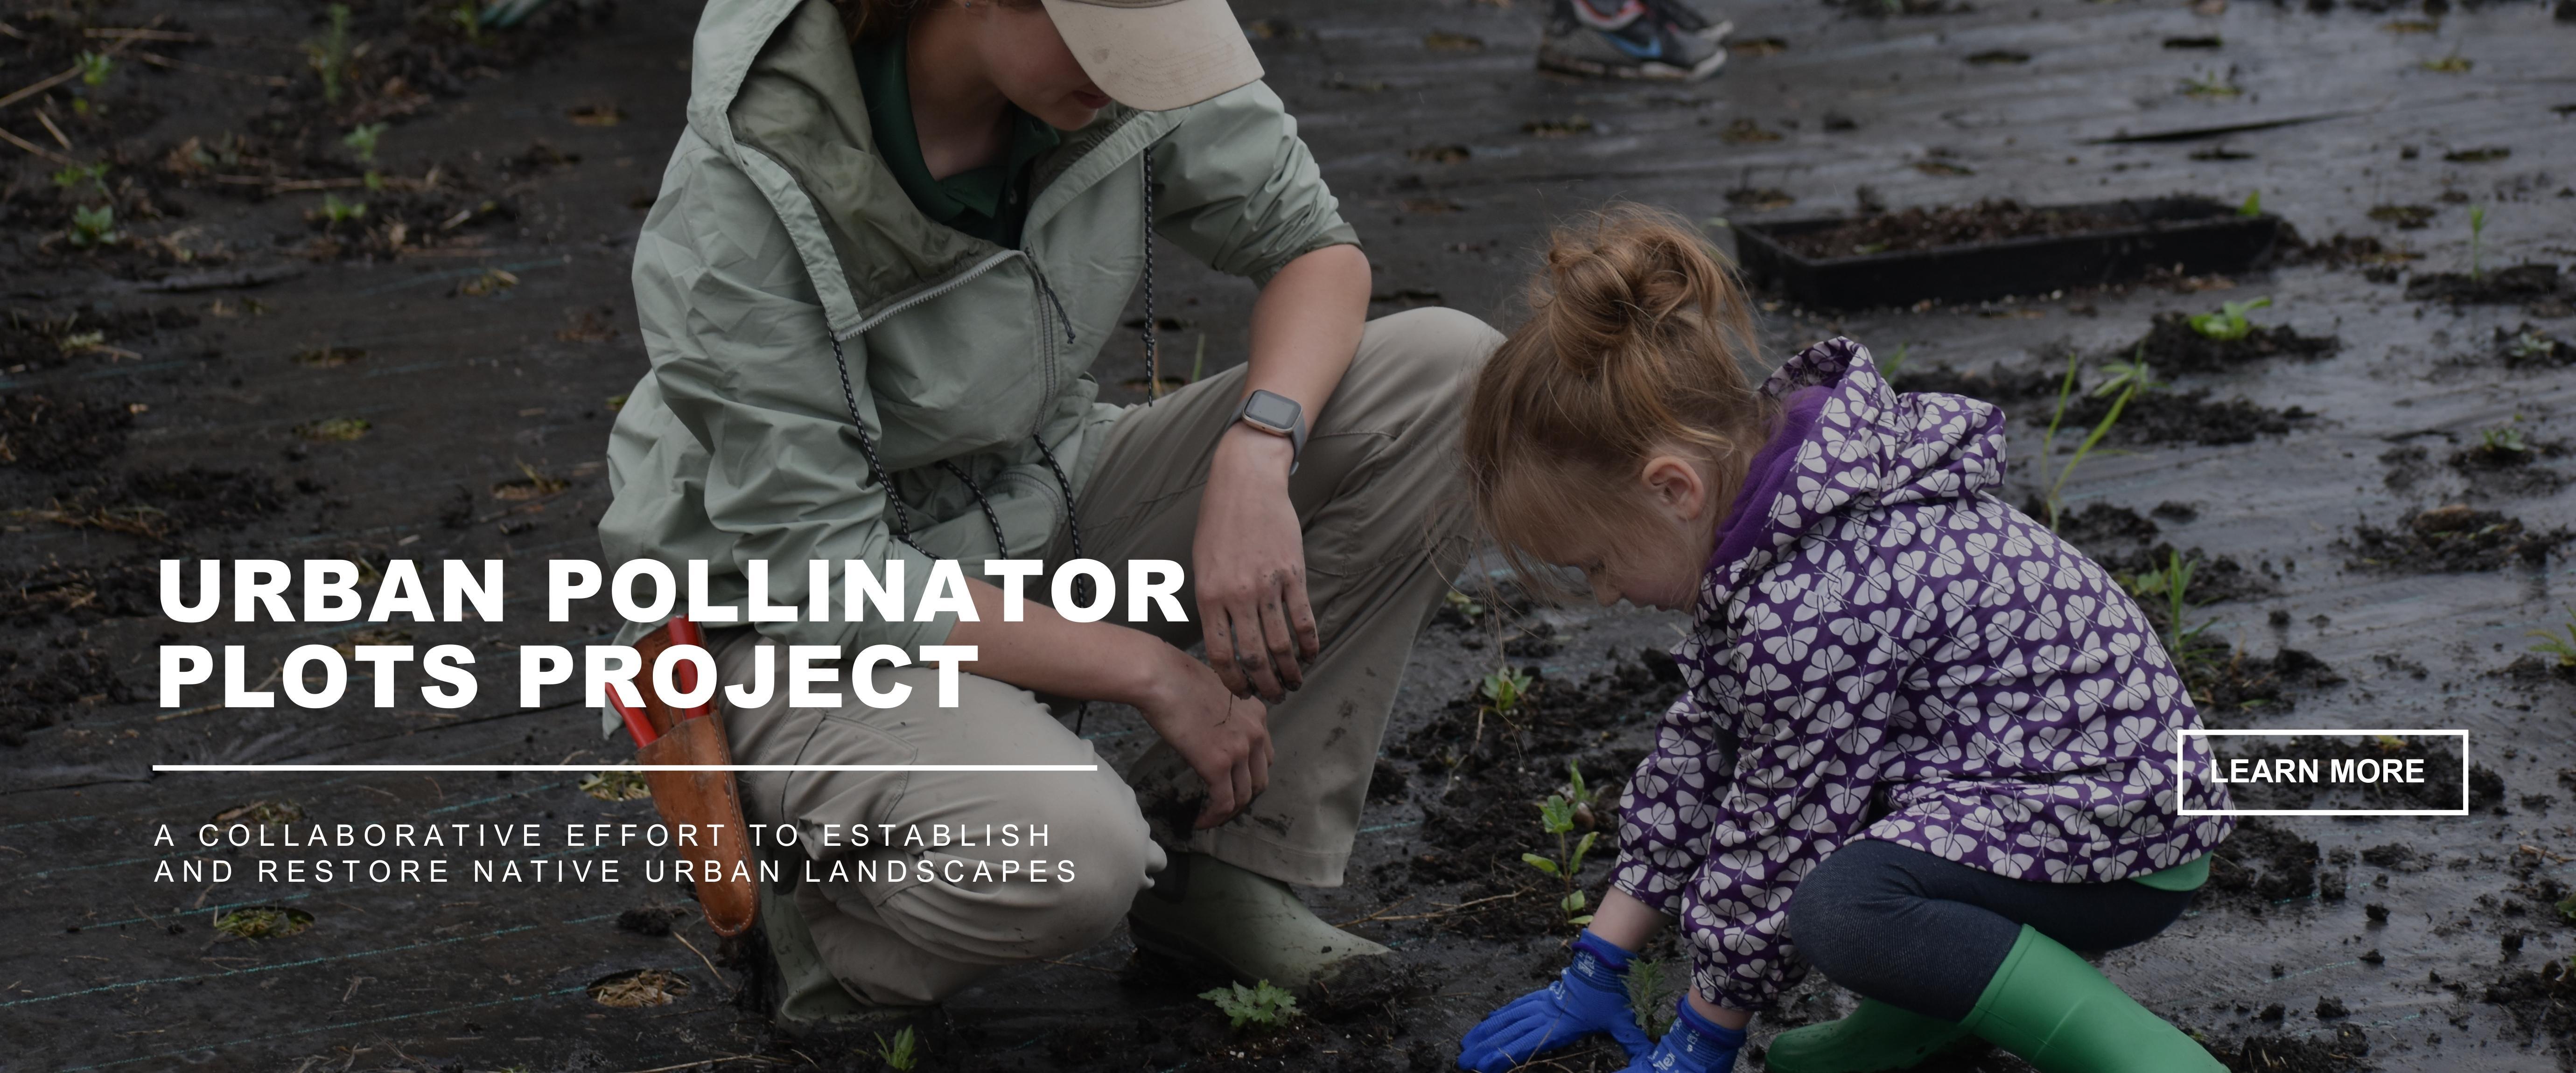 Urban Pollinator Plots Project - a collaborative effort to establish  and restore native urban landscapes - Image of adult crouching down next to crouching child planting a plant with a learn more button